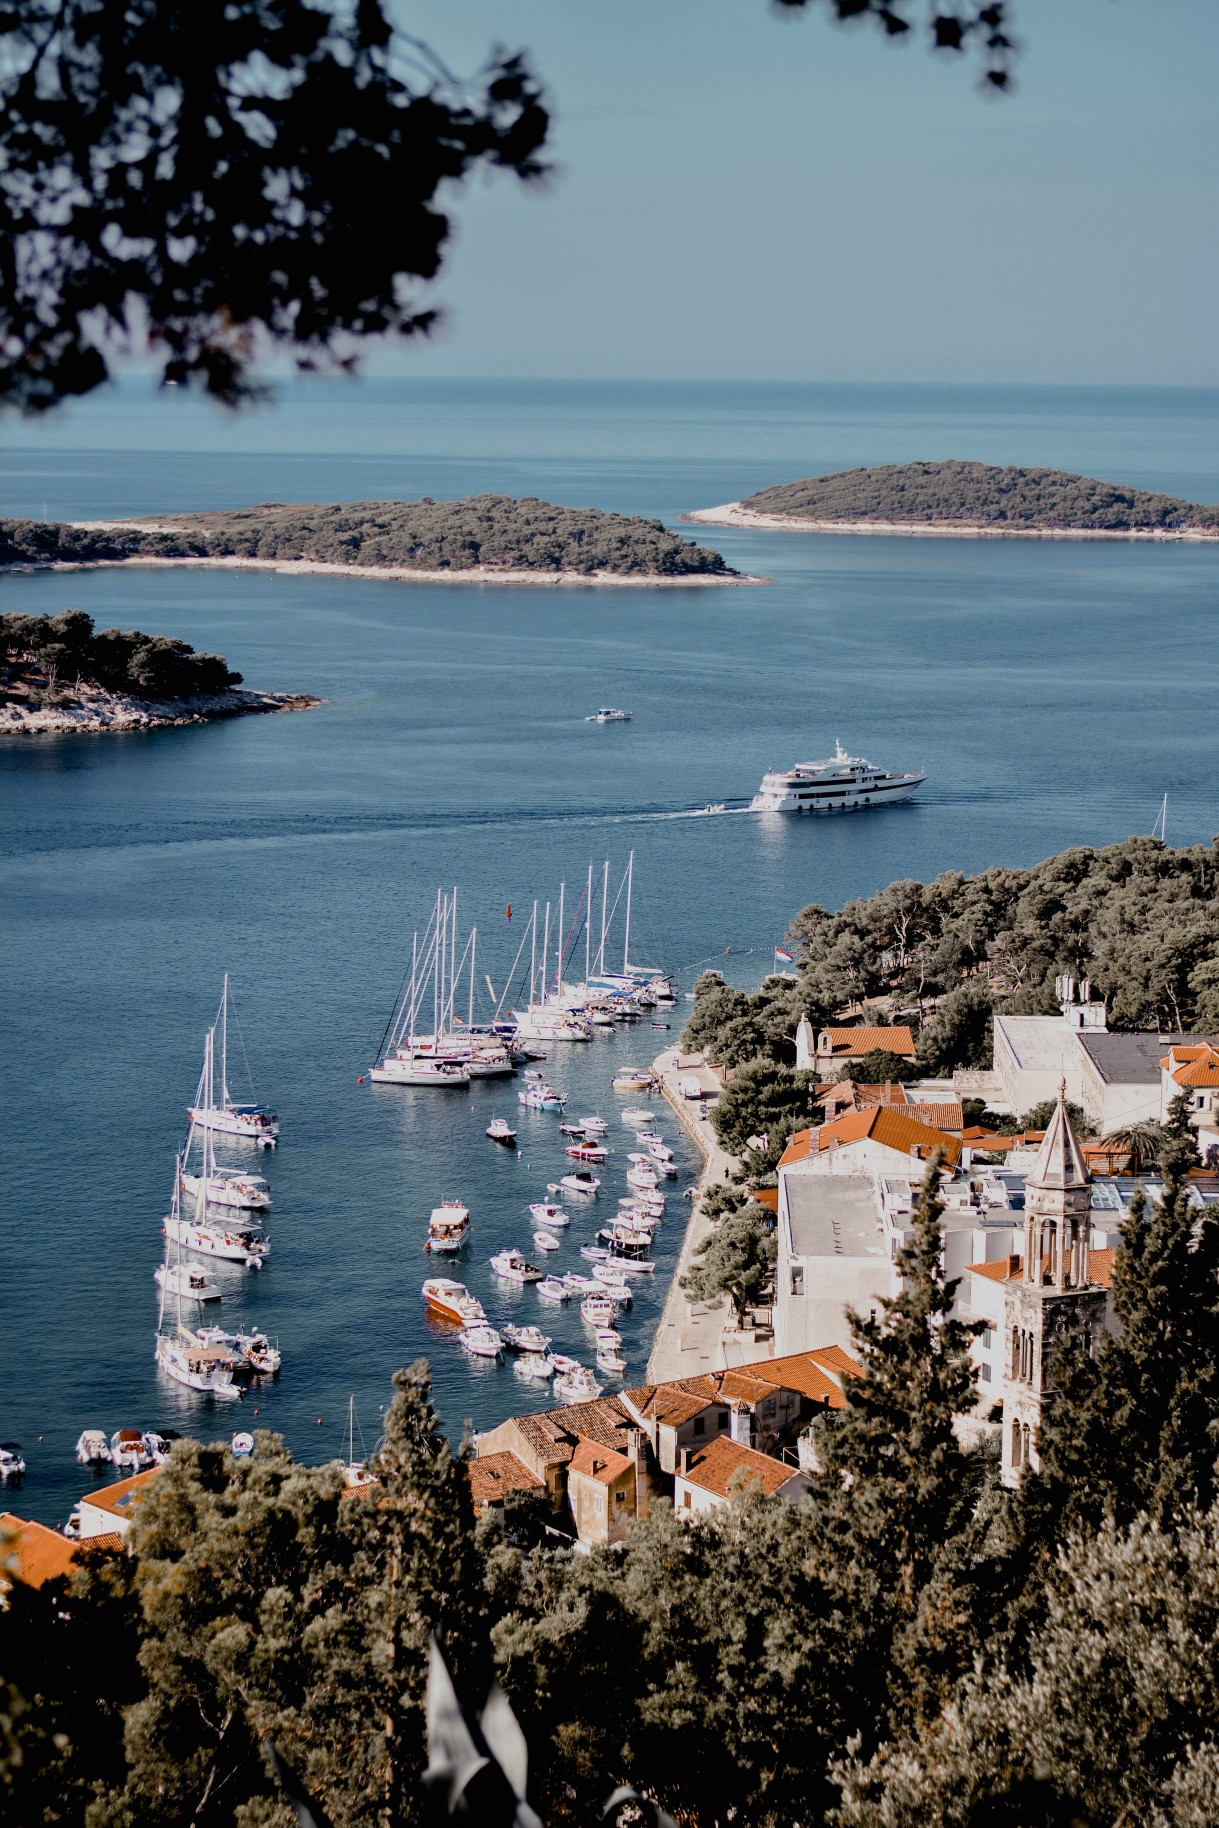 view of boats along the coastline during daytime